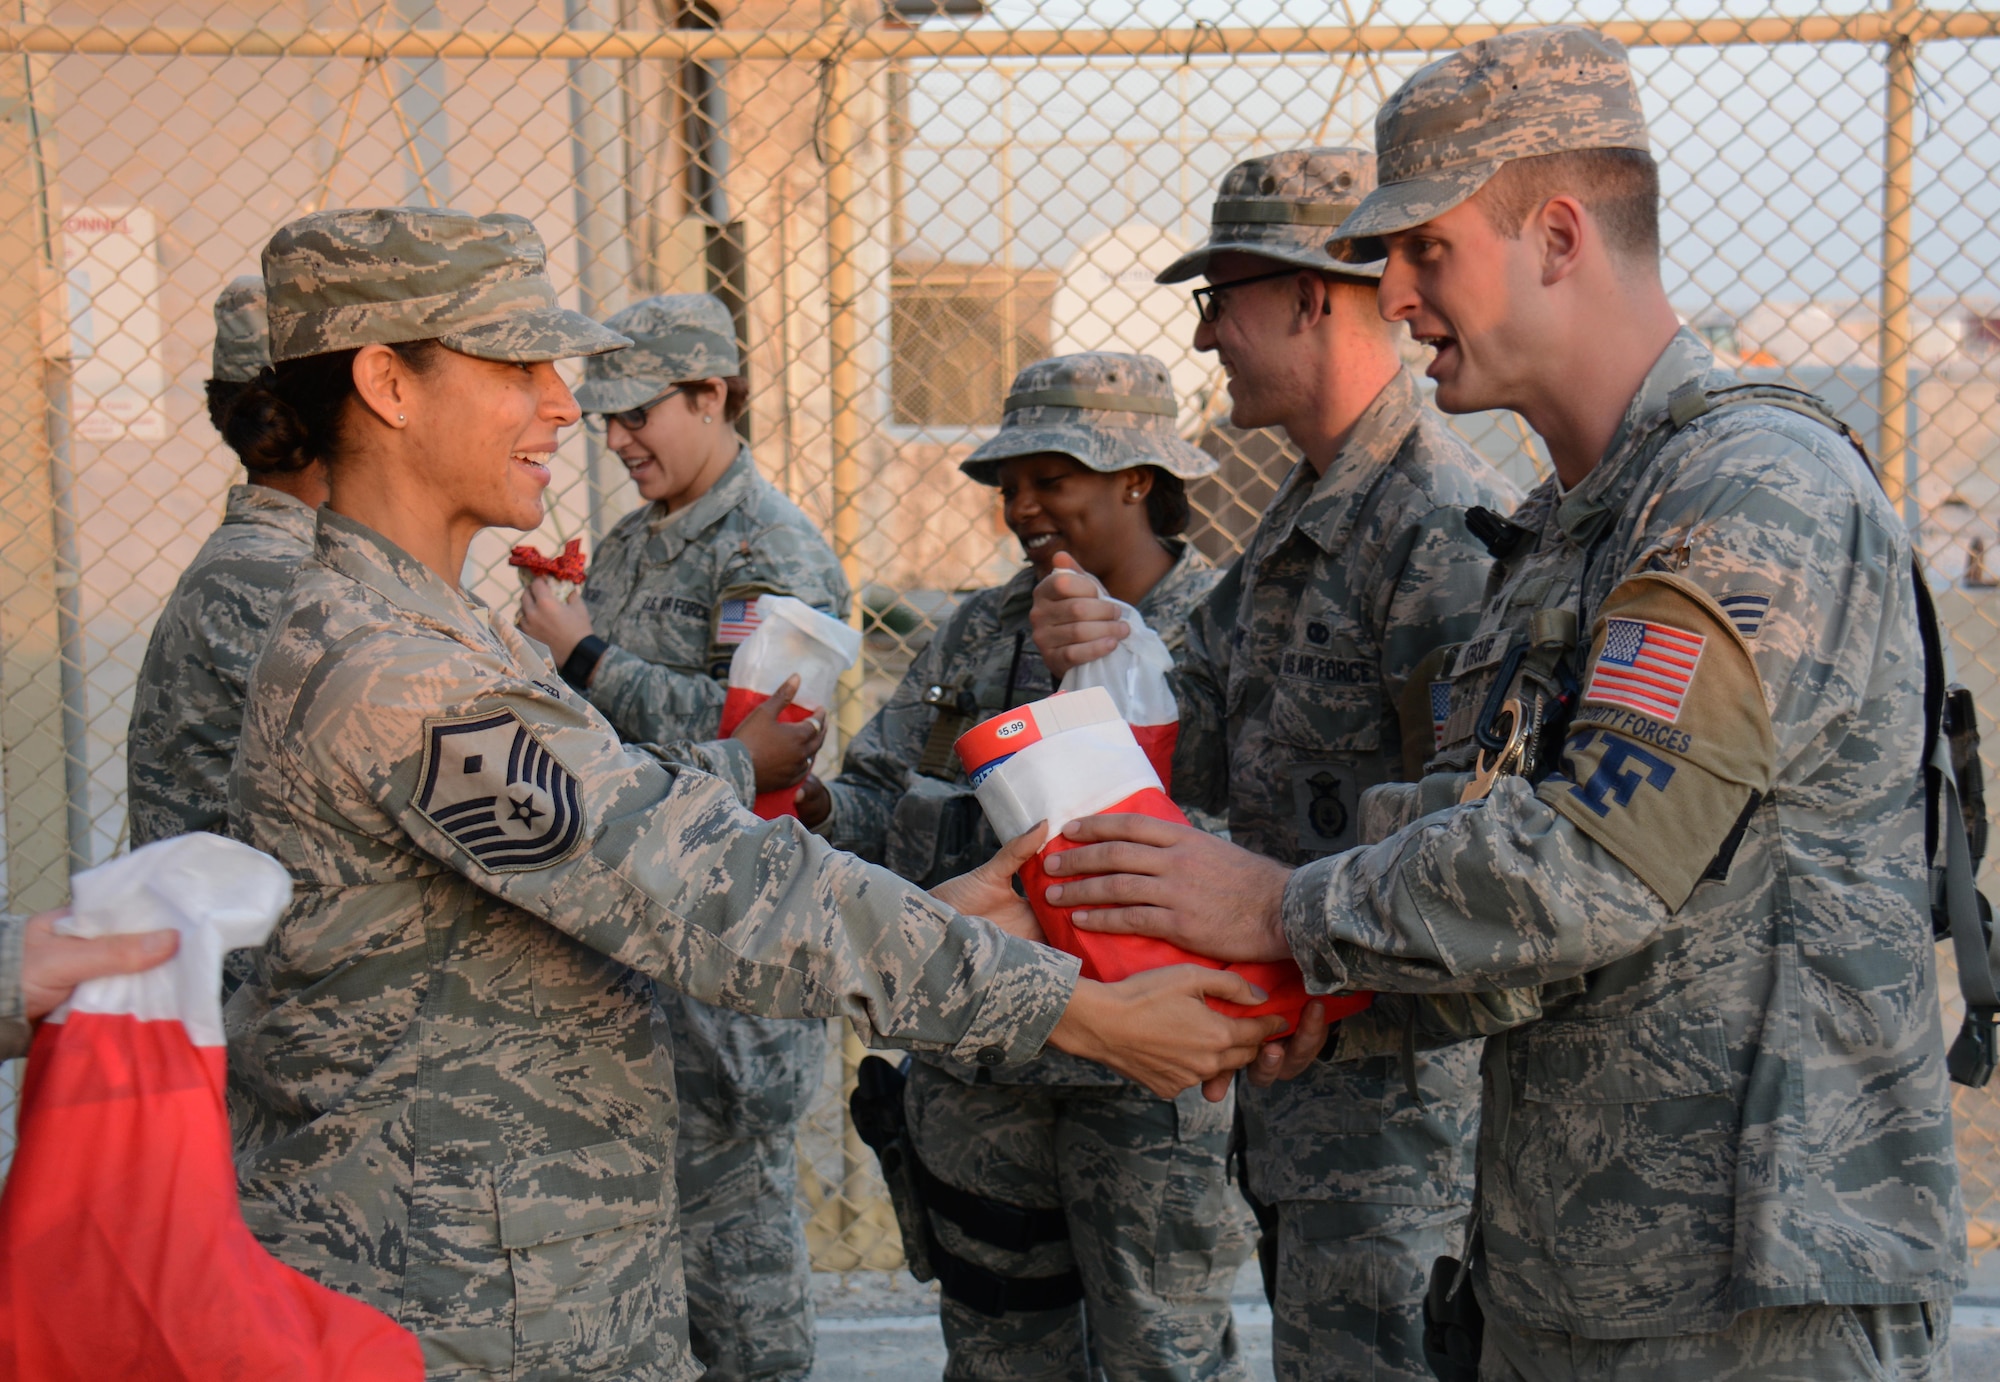 Master Sgt. Daira Hall, 379th Air Expeditionary Wing first sergeant from Minneapolis, Minnesota, delivers holiday stockings filled with candy, games and Christmas cards to security forces airmen at Al Udeid Air Base, Qatar Dec. 23. Hall said the first sergeants decided to deliver the stockings to security forces Airmen to thank them for all they do to keep people safe. (U.S. Air Force photo by Tech. Sgt. James Hodgman) 